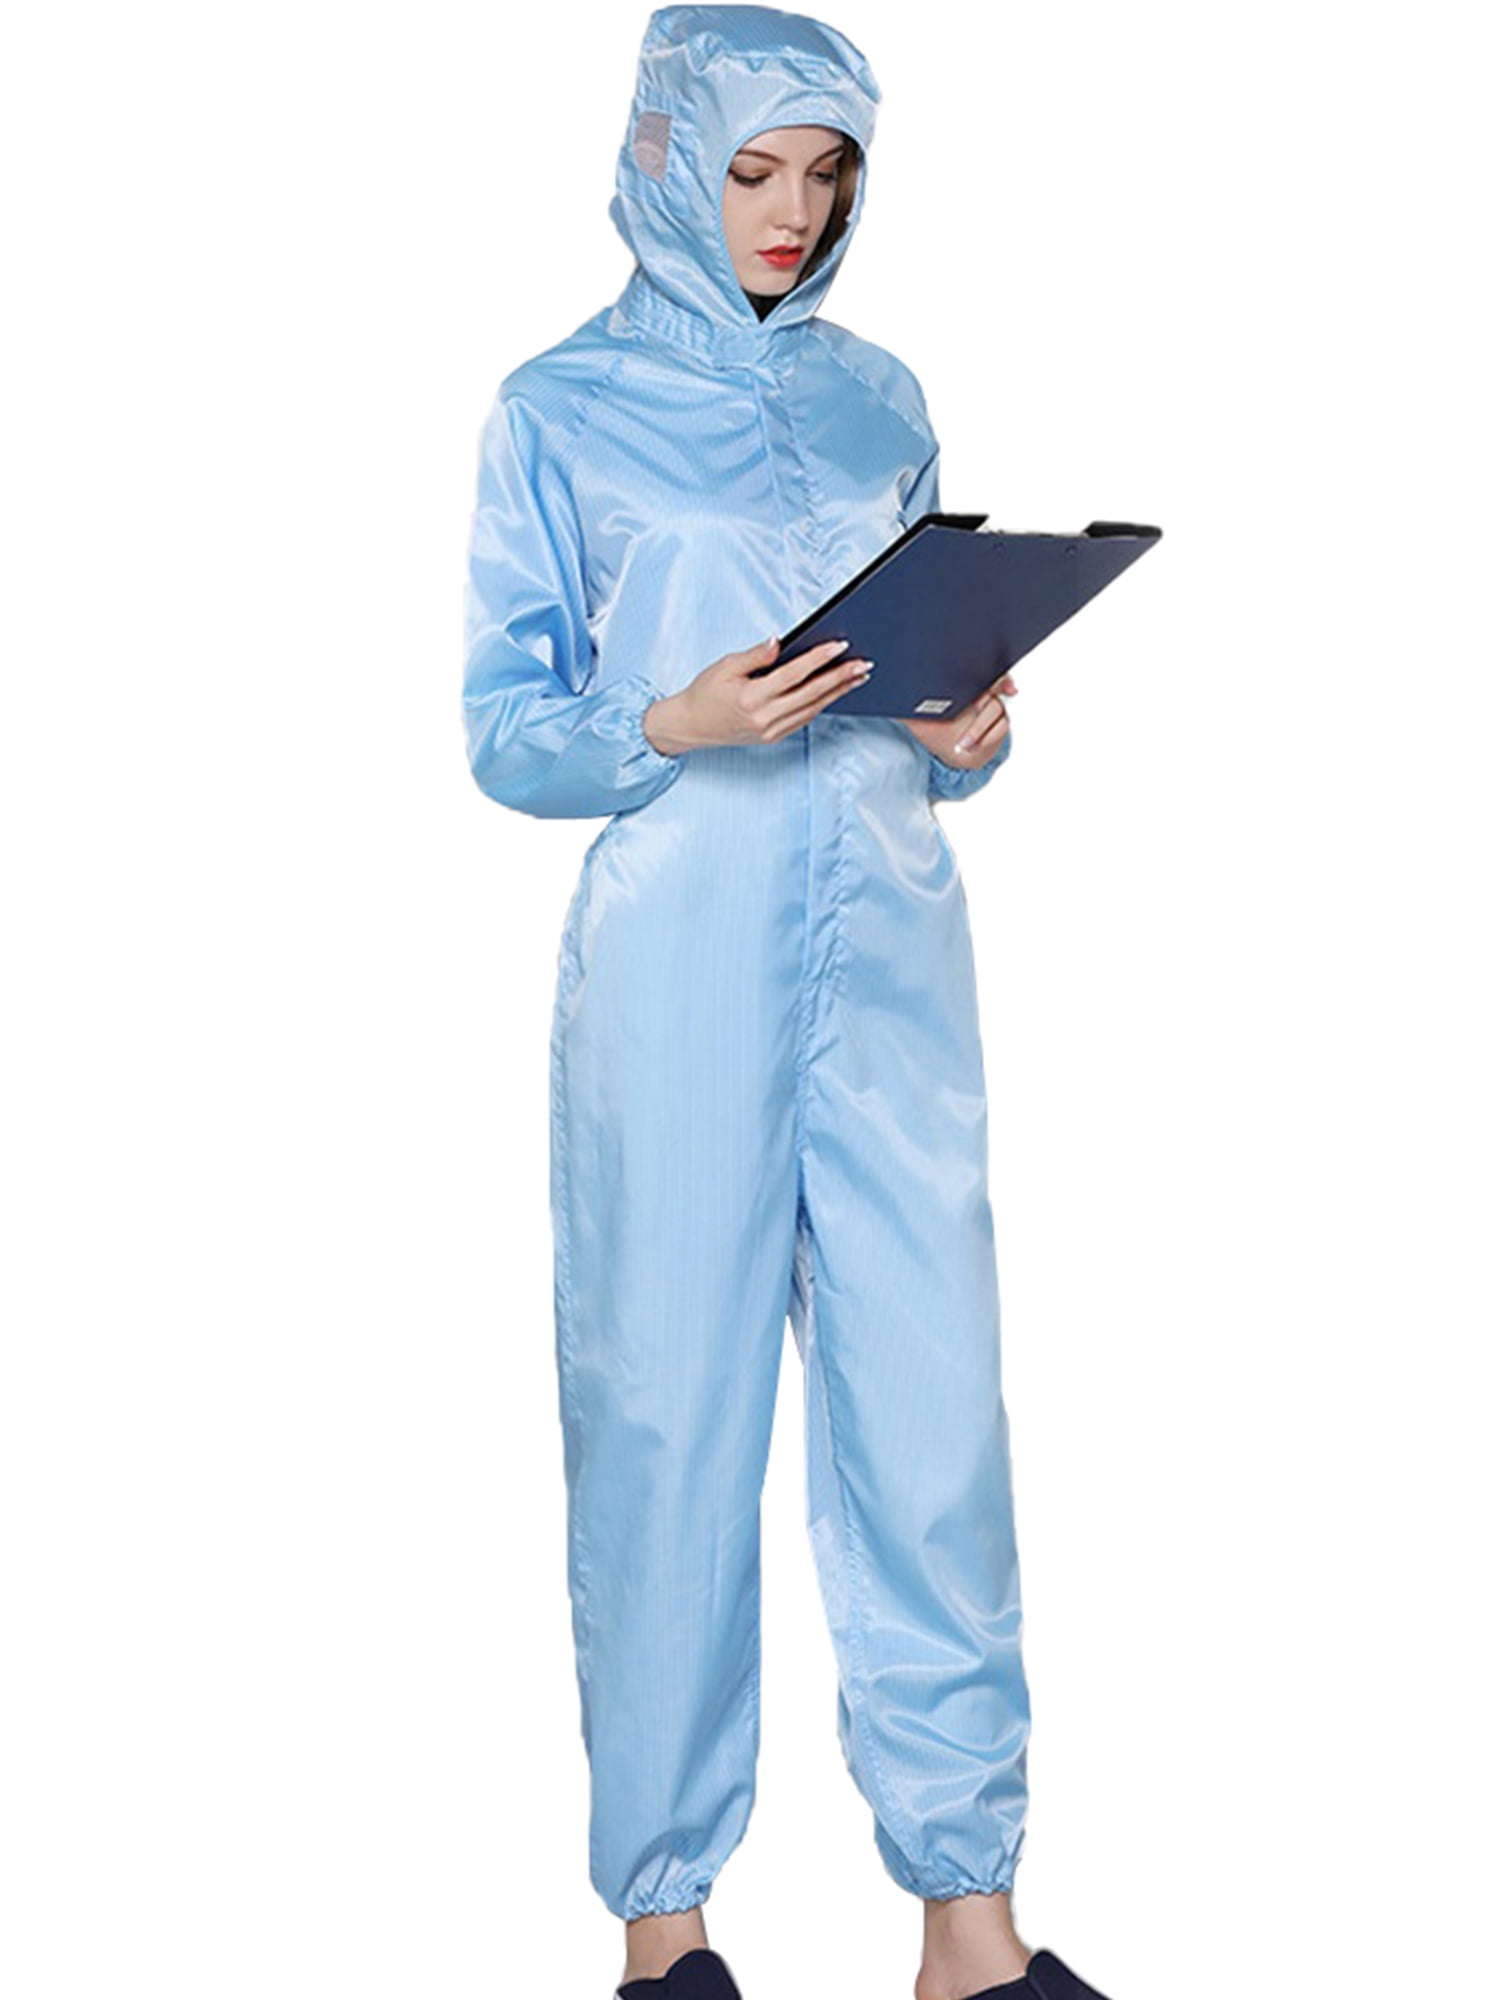 blue, S Protective Coveralls with Hood Reusable Washable Dust-Proof Plus Size Protective Coveralls with Elastic Cuffs for Women Men